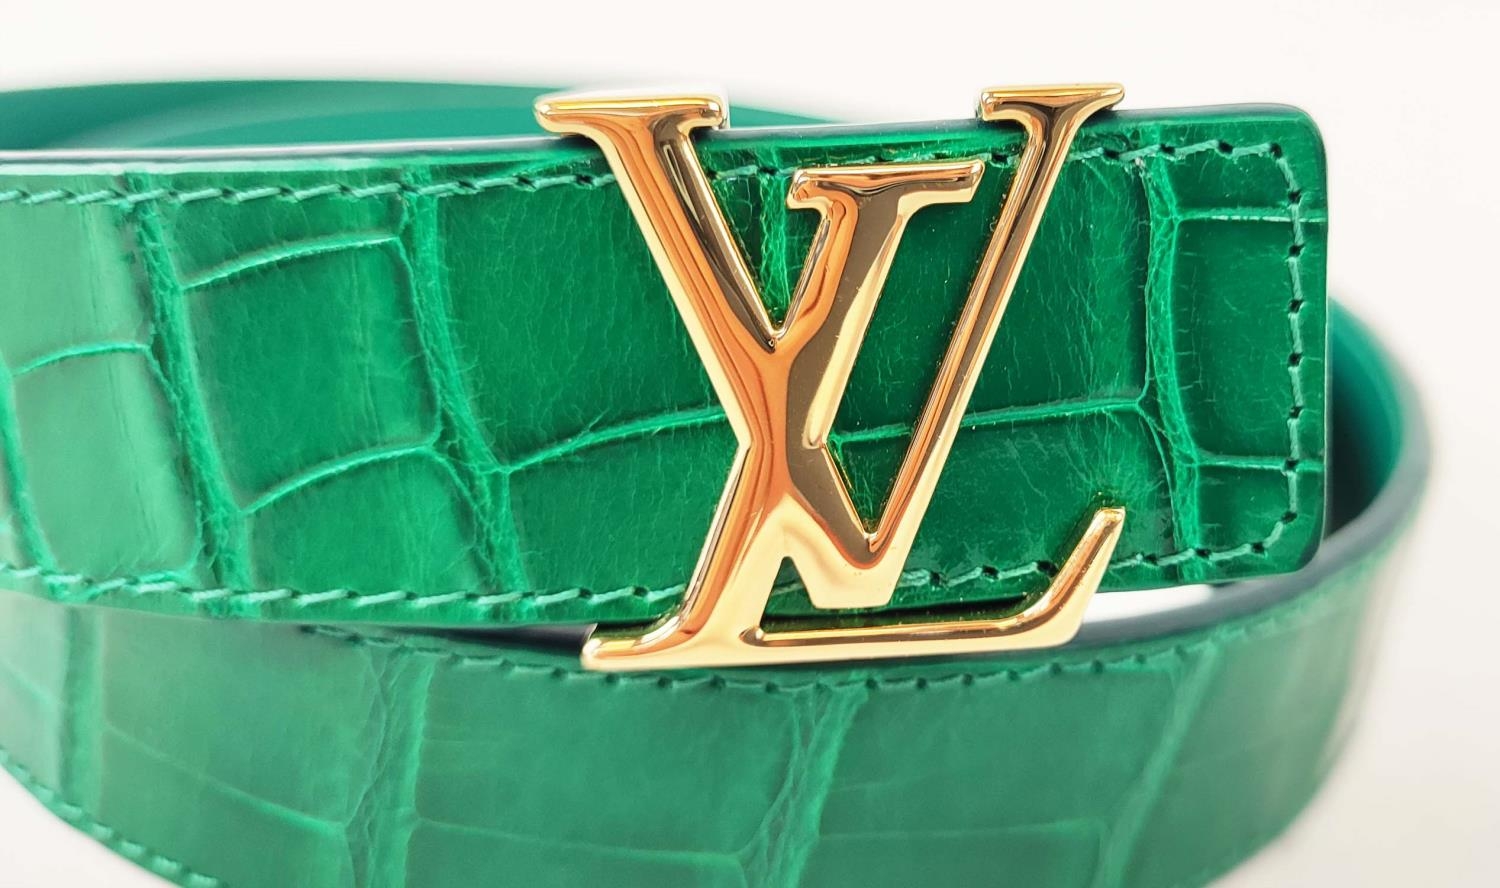 LOUIS VUITTON CROCODILE BELT, green exotic leather with gold tone initials at the front, size 80/32, - Image 2 of 4